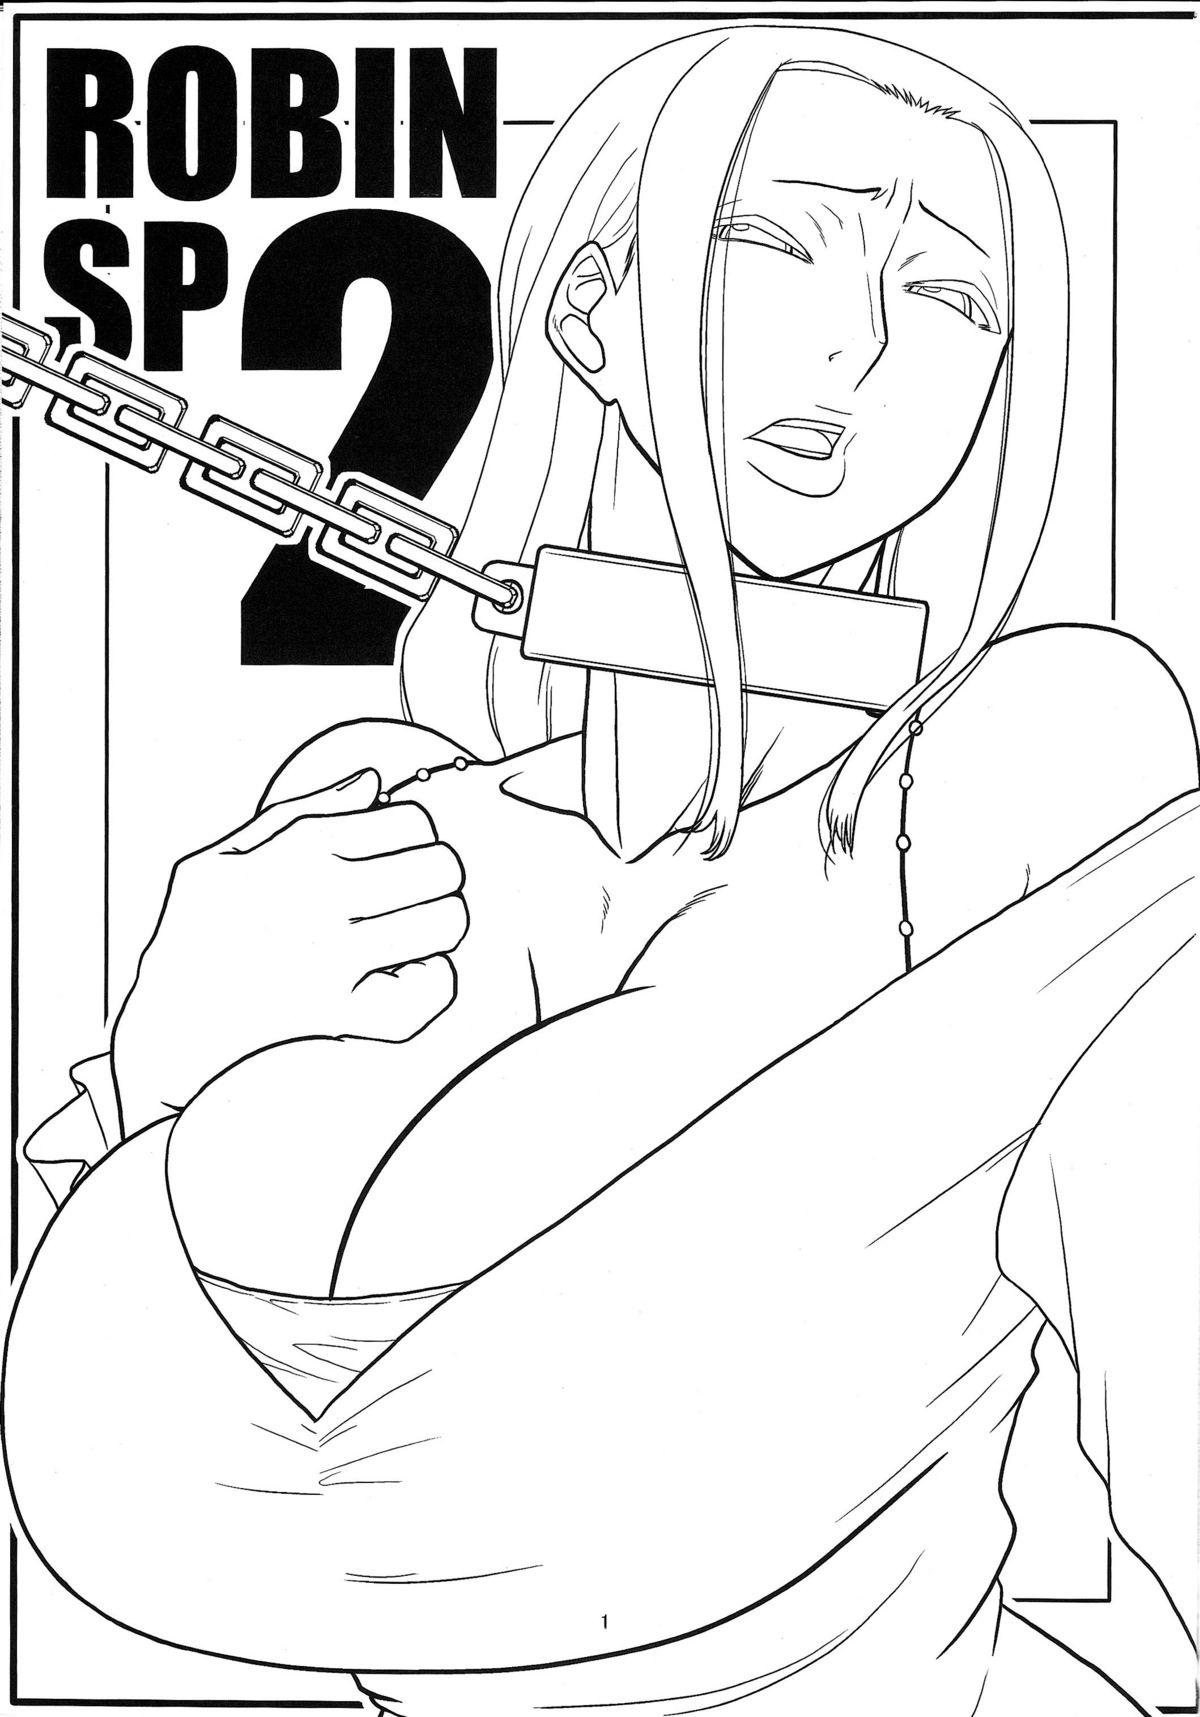 Sis ROBIN SP 2 - One piece Tgirl - Page 2